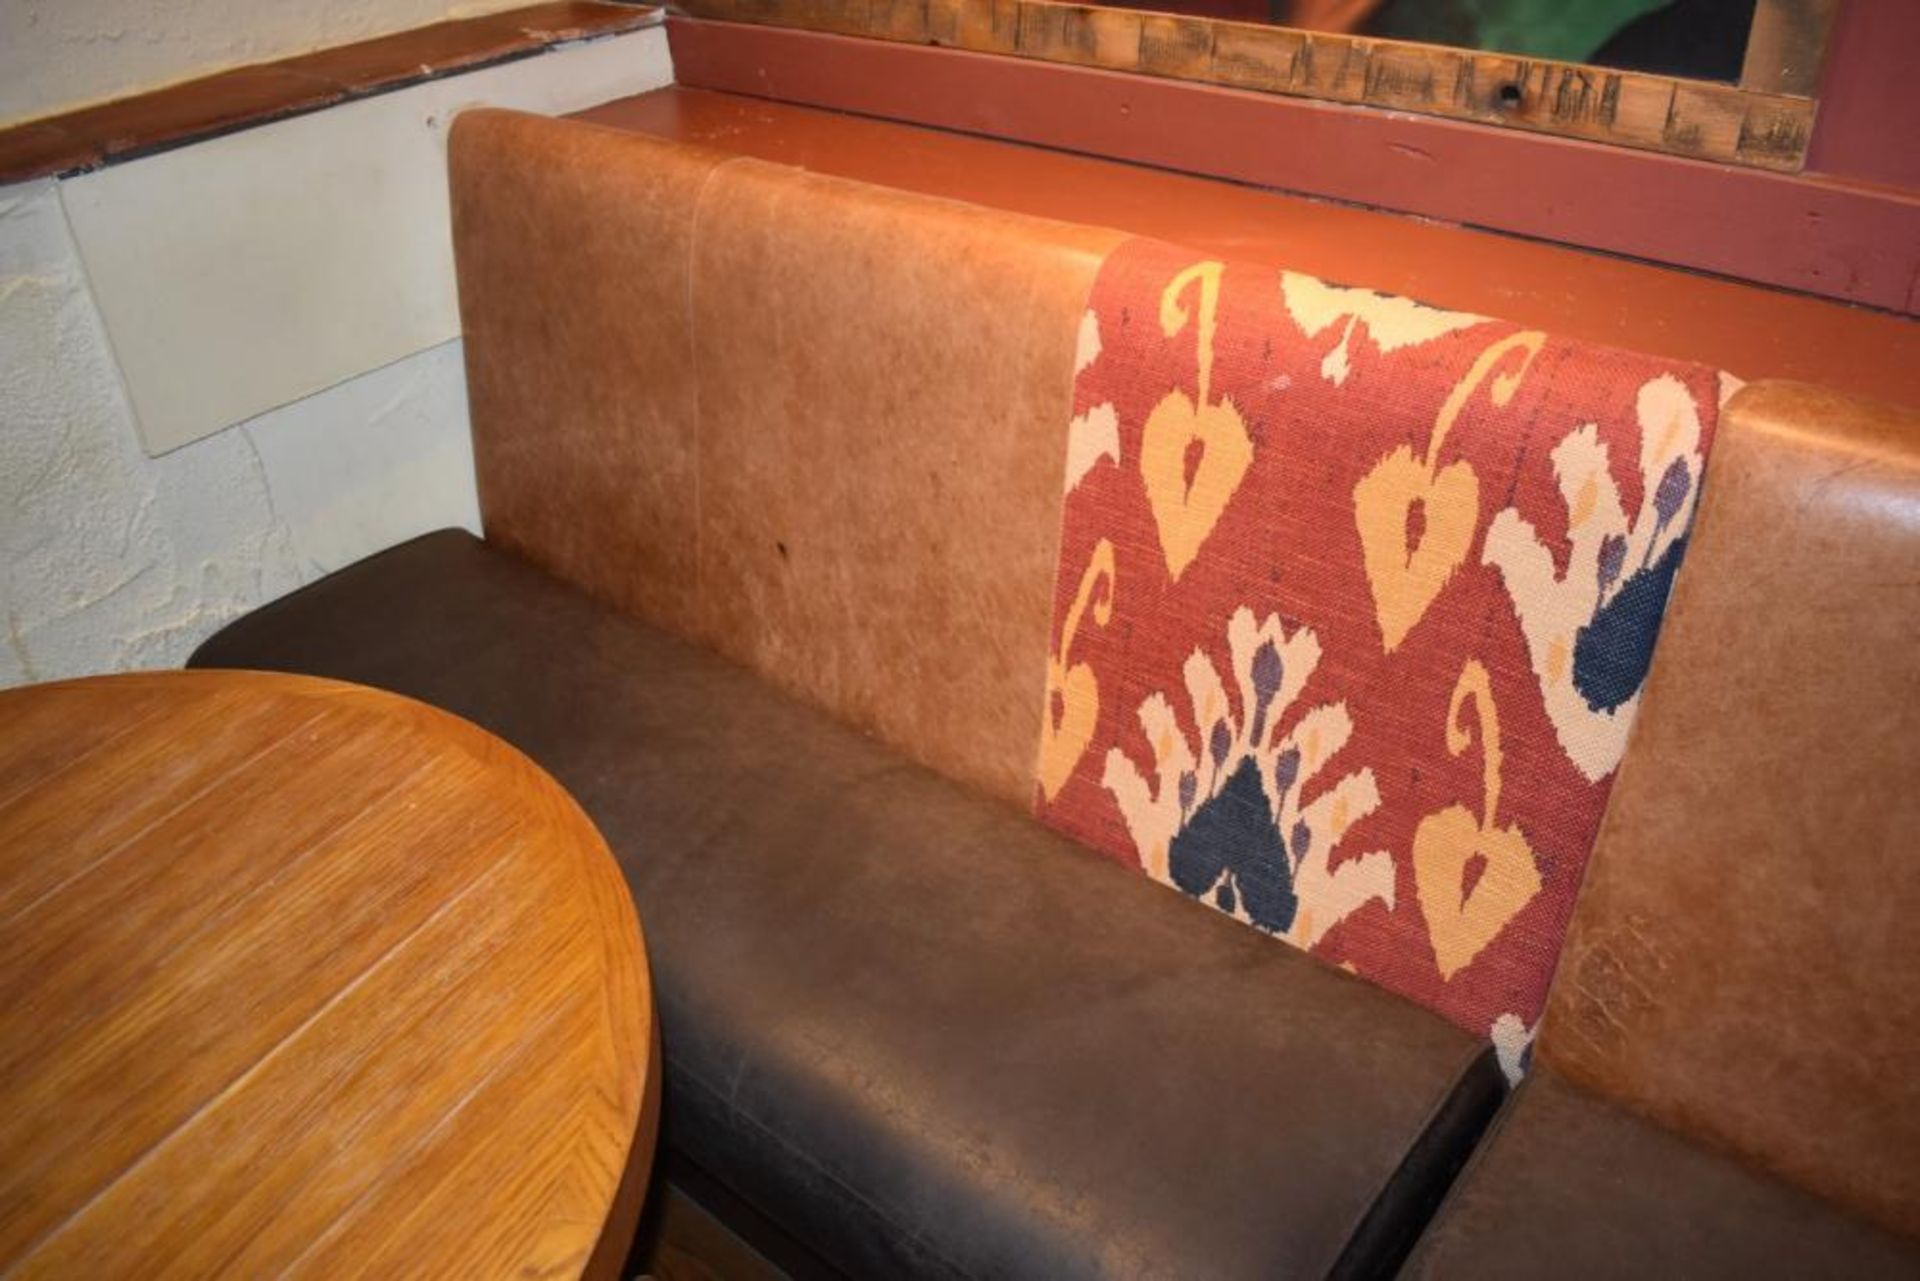 1 x Long Seating Bench From Mexican Themed Restaurant - CL461 - Ref PR889 - Location: London W3 - Image 6 of 7